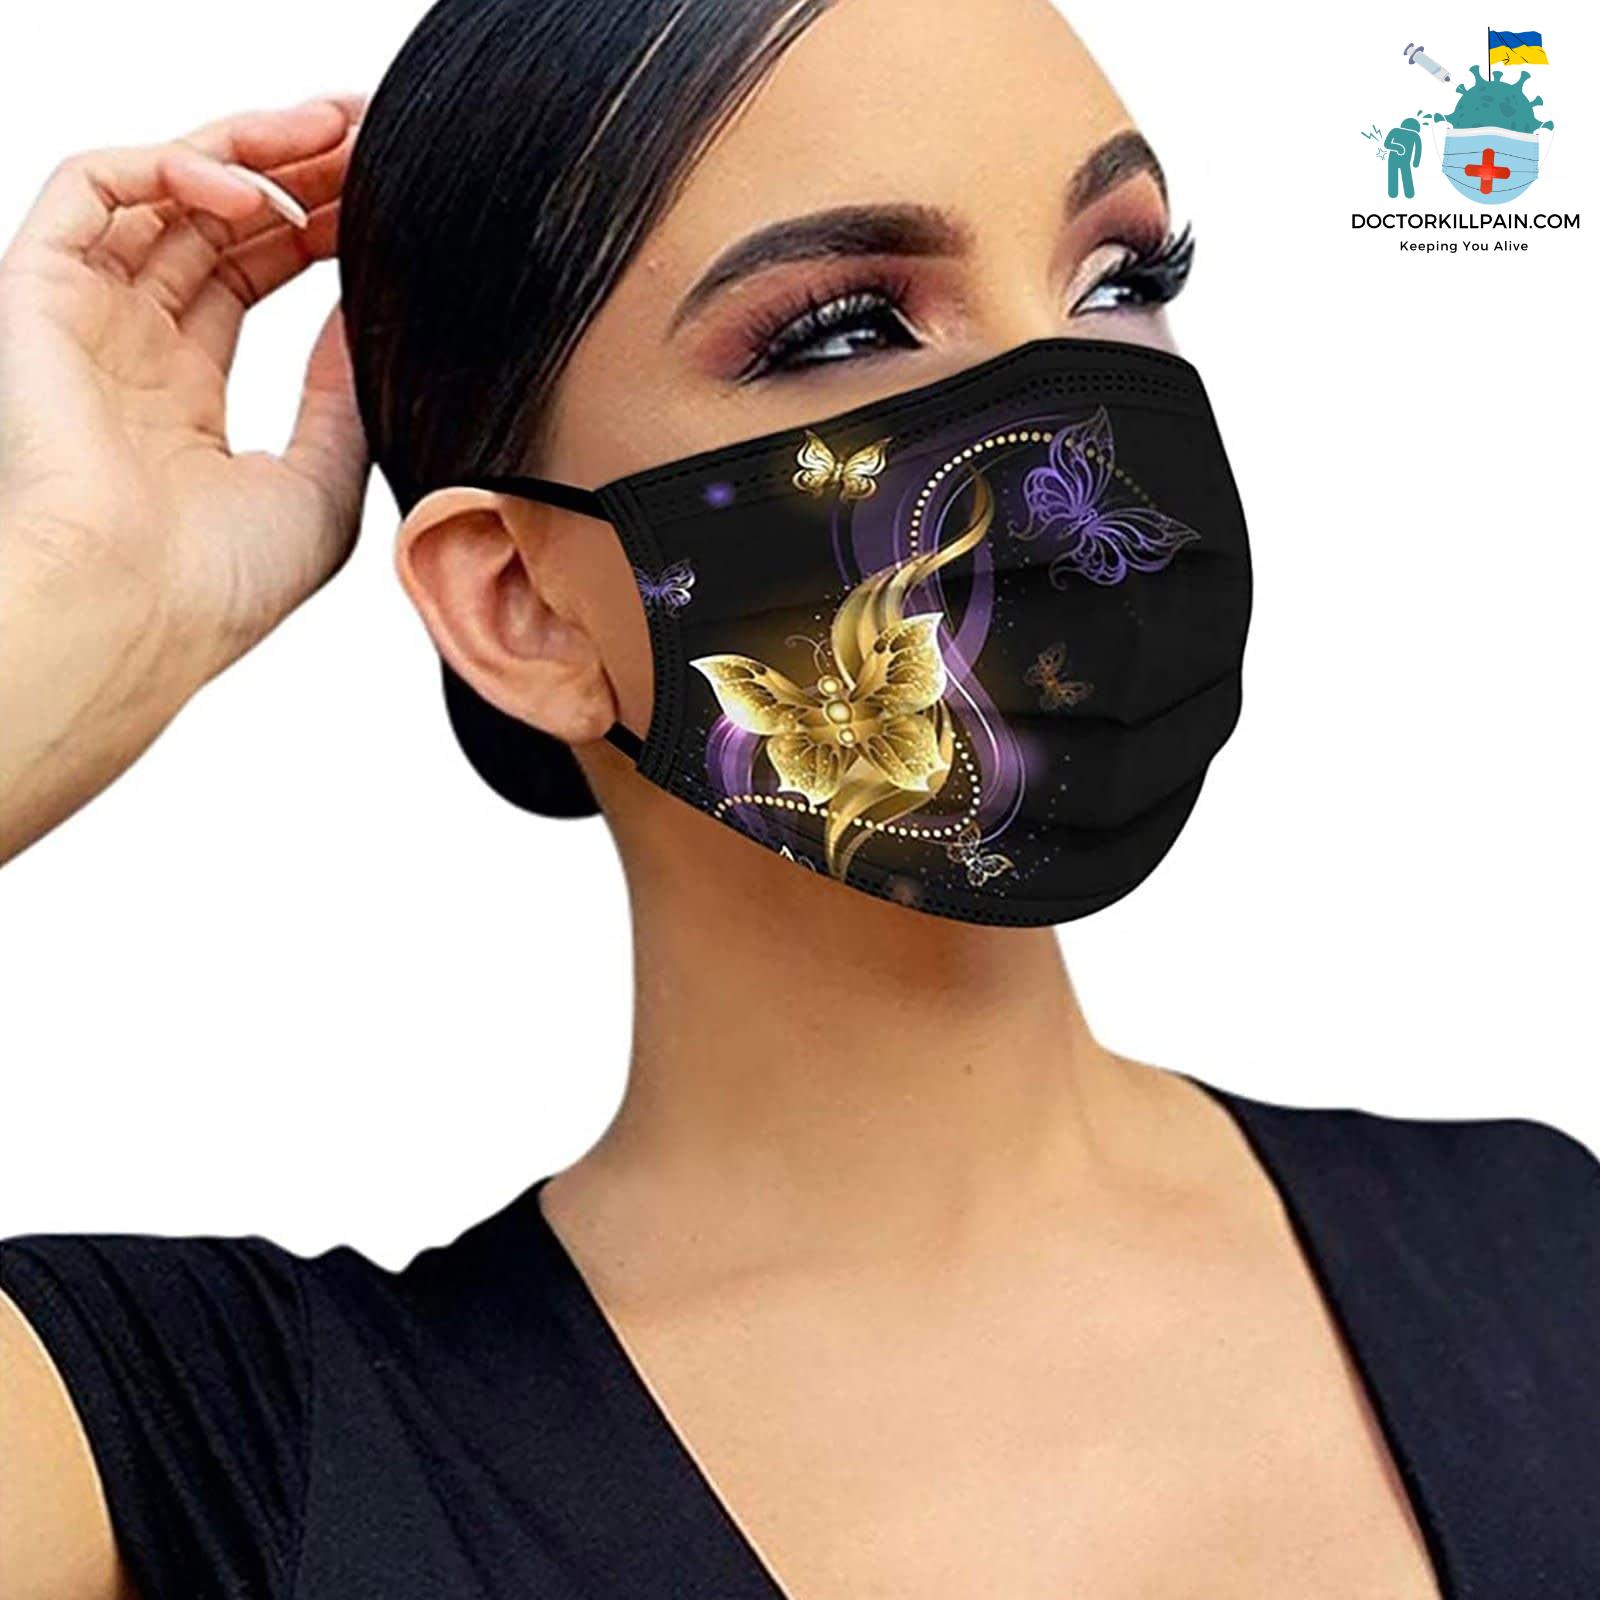 Adult Face Mask. 50pc Disposable Masks Butterflies Mask for Women Fashion Covers Fashion Mouths 3-ply Proteccion Face Masks Halloween Cosplay